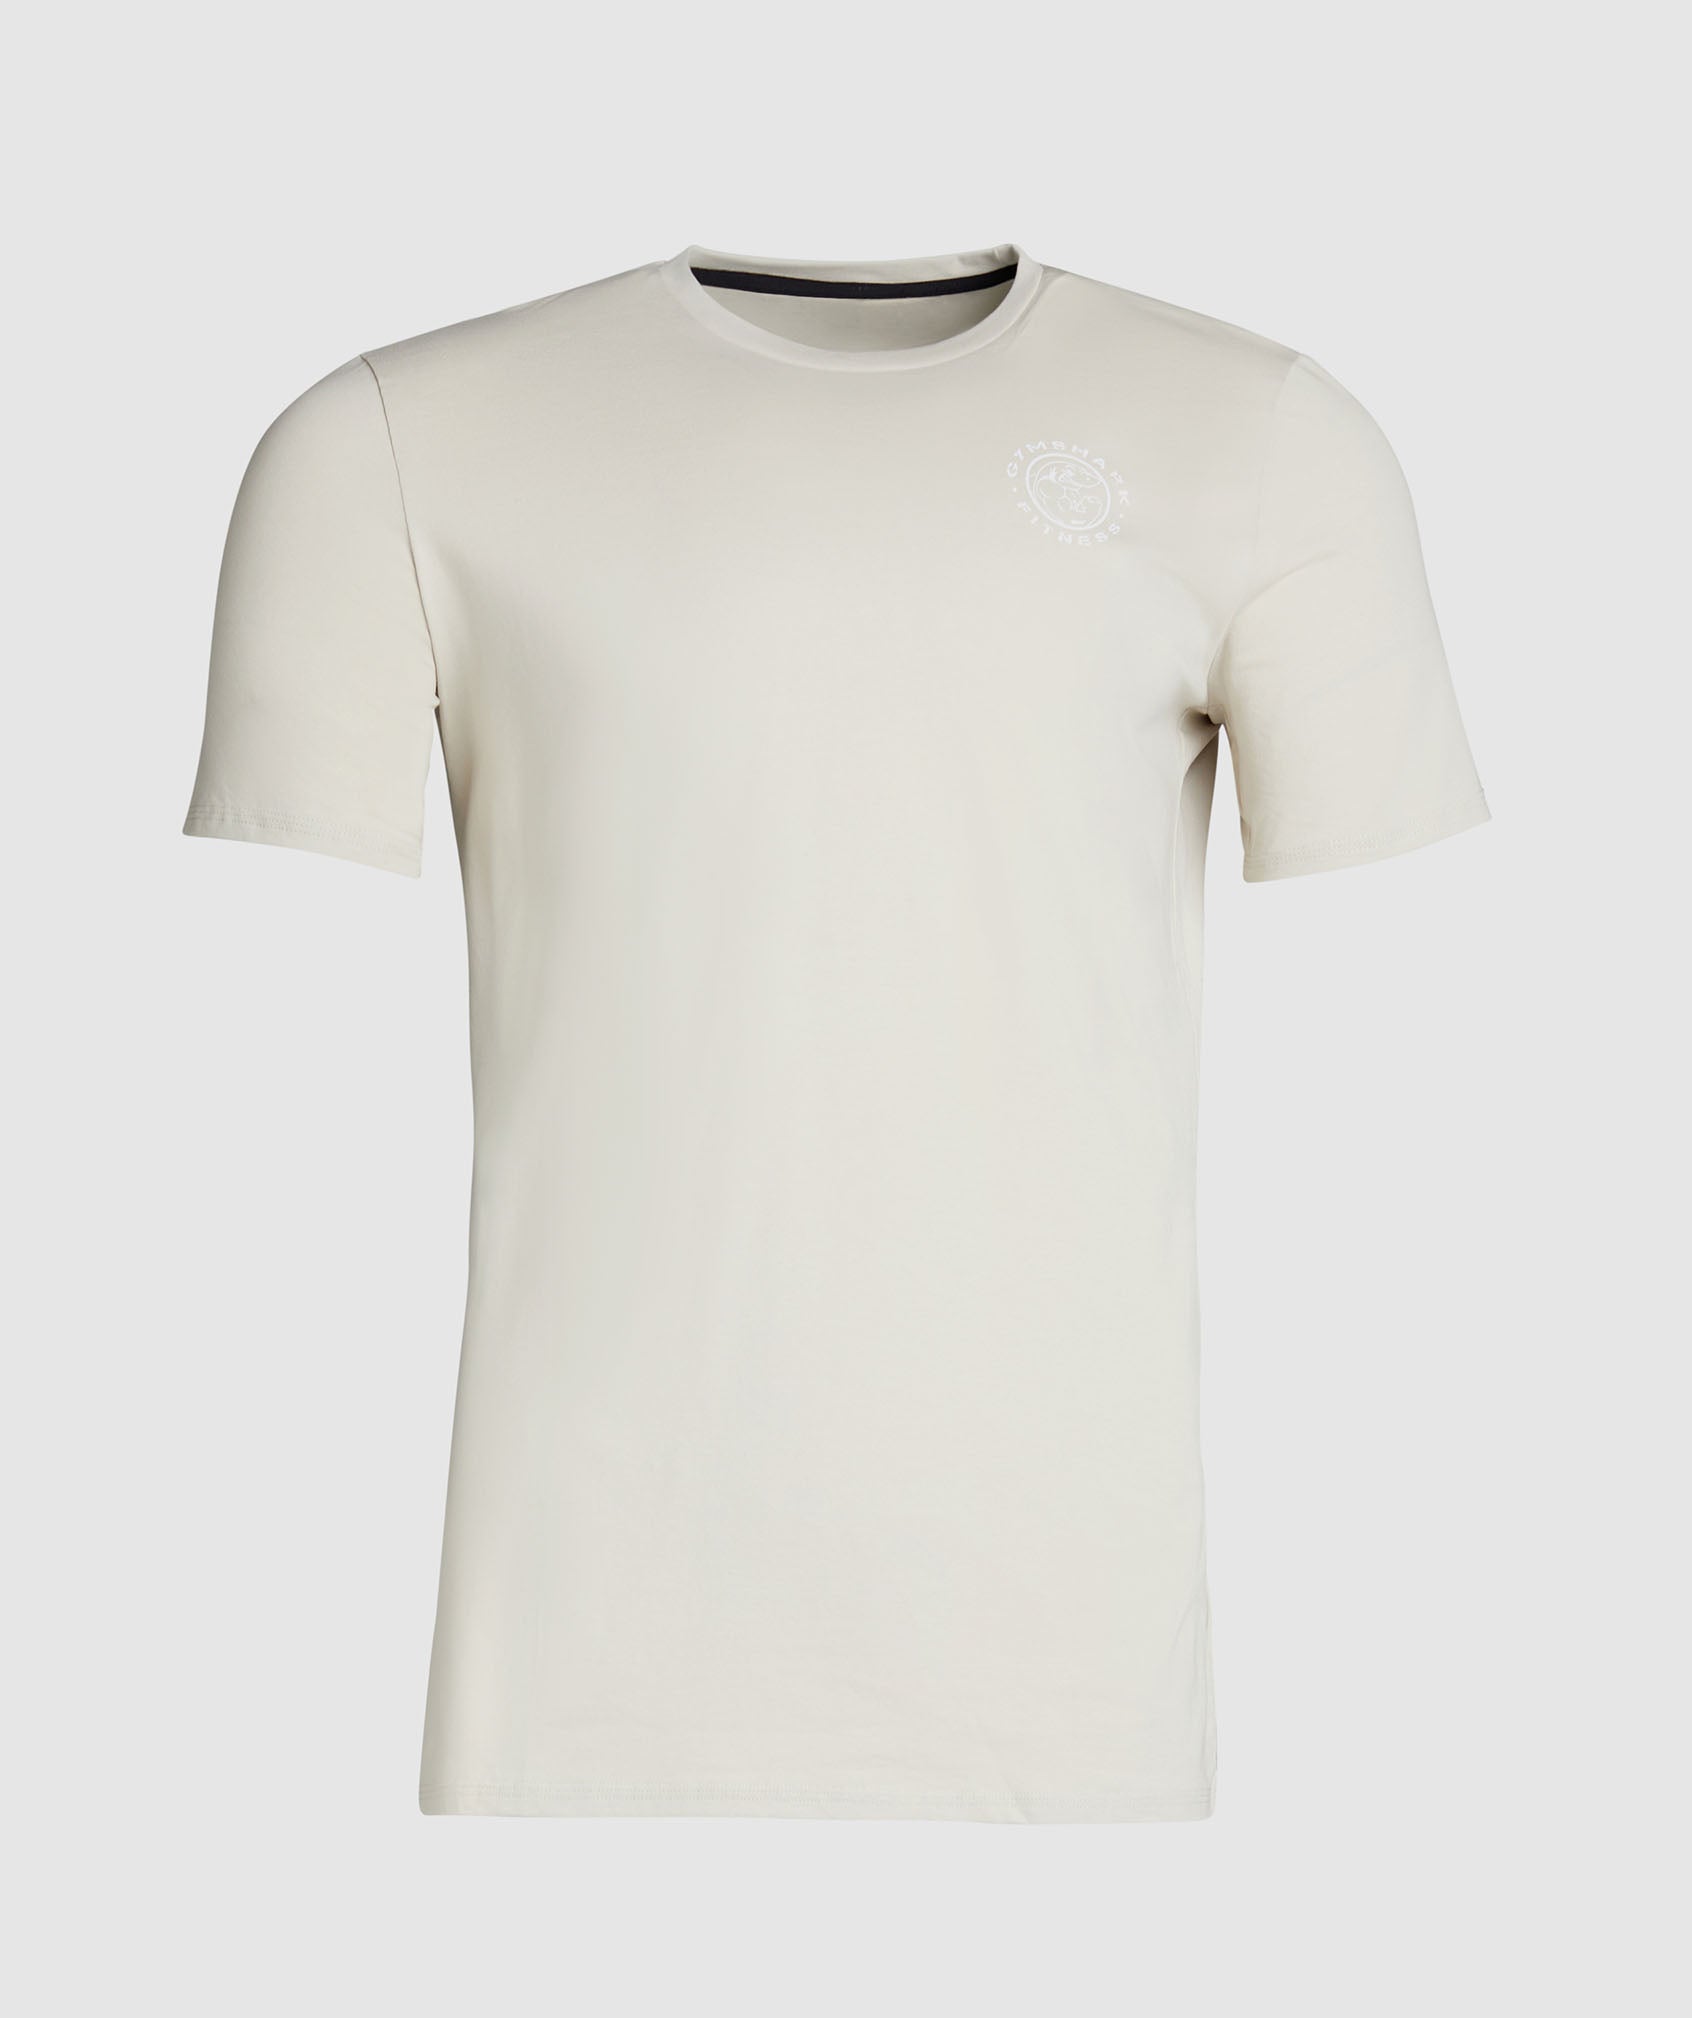 Legacy T-Shirt in Pebble Grey - view 8